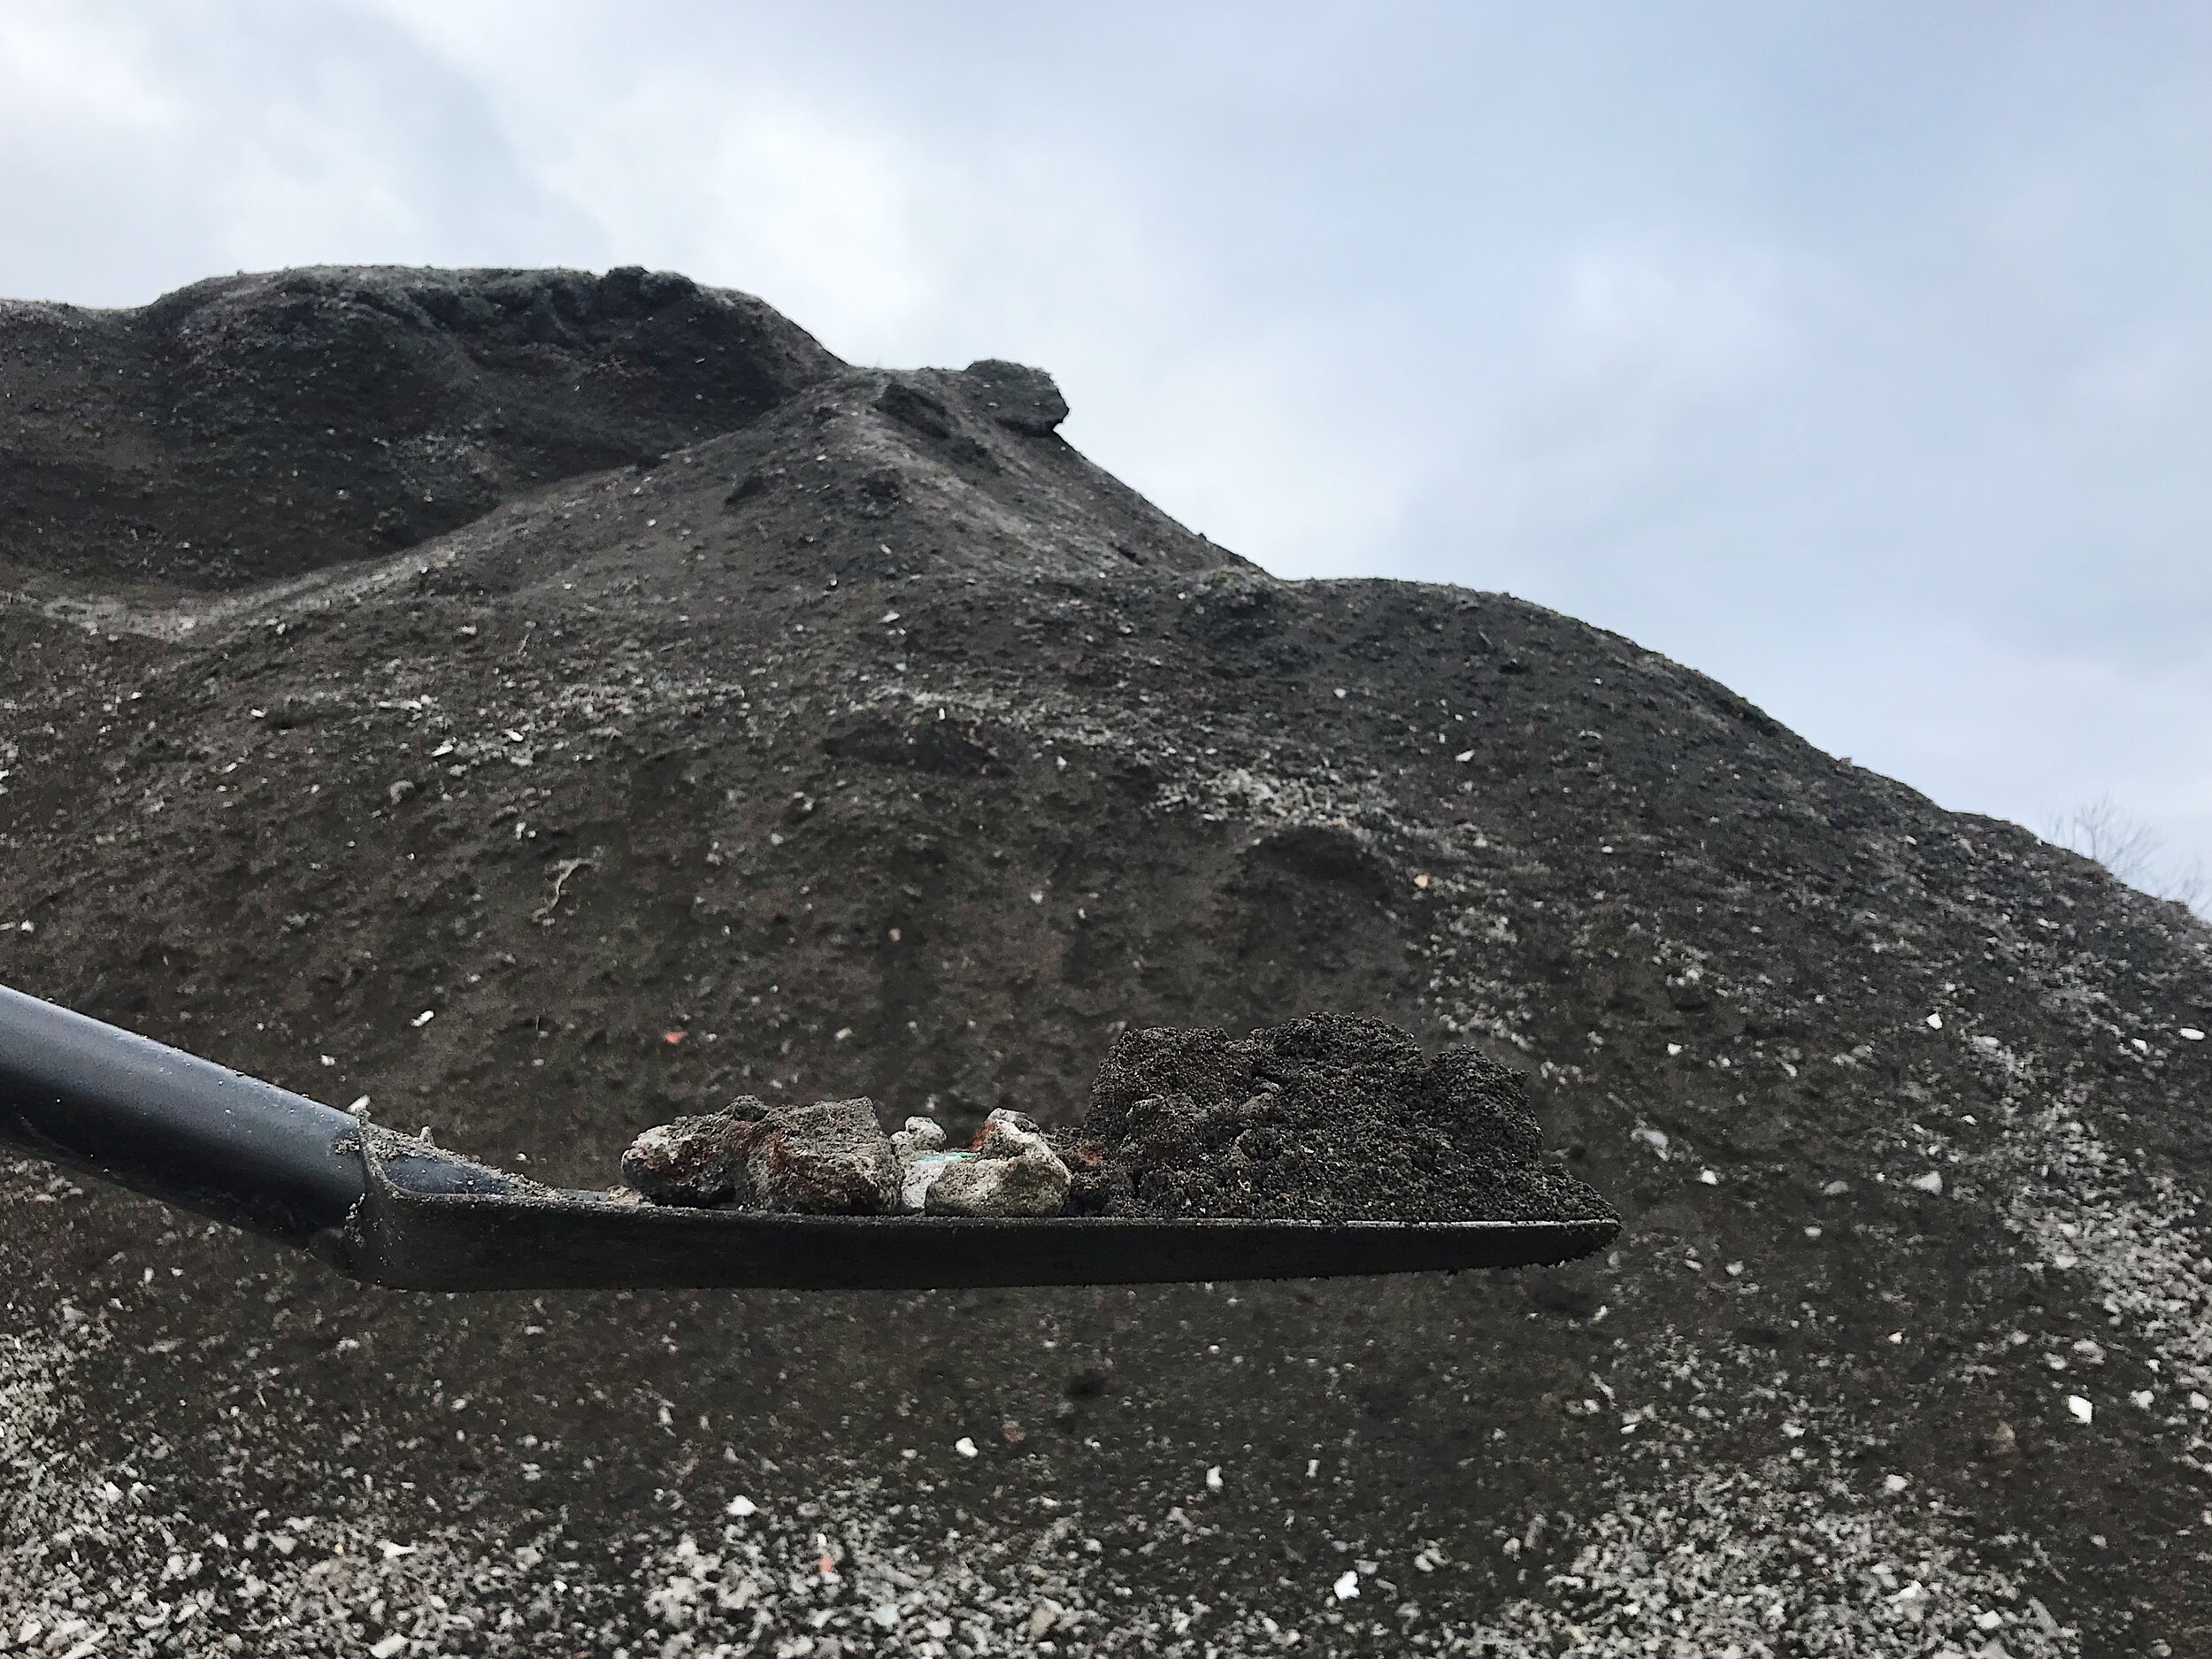   Materials for the Wasteland sculptures are mined from the piles of toxic ashes and waste. Photo: Annelie Grimwade Olofsson  